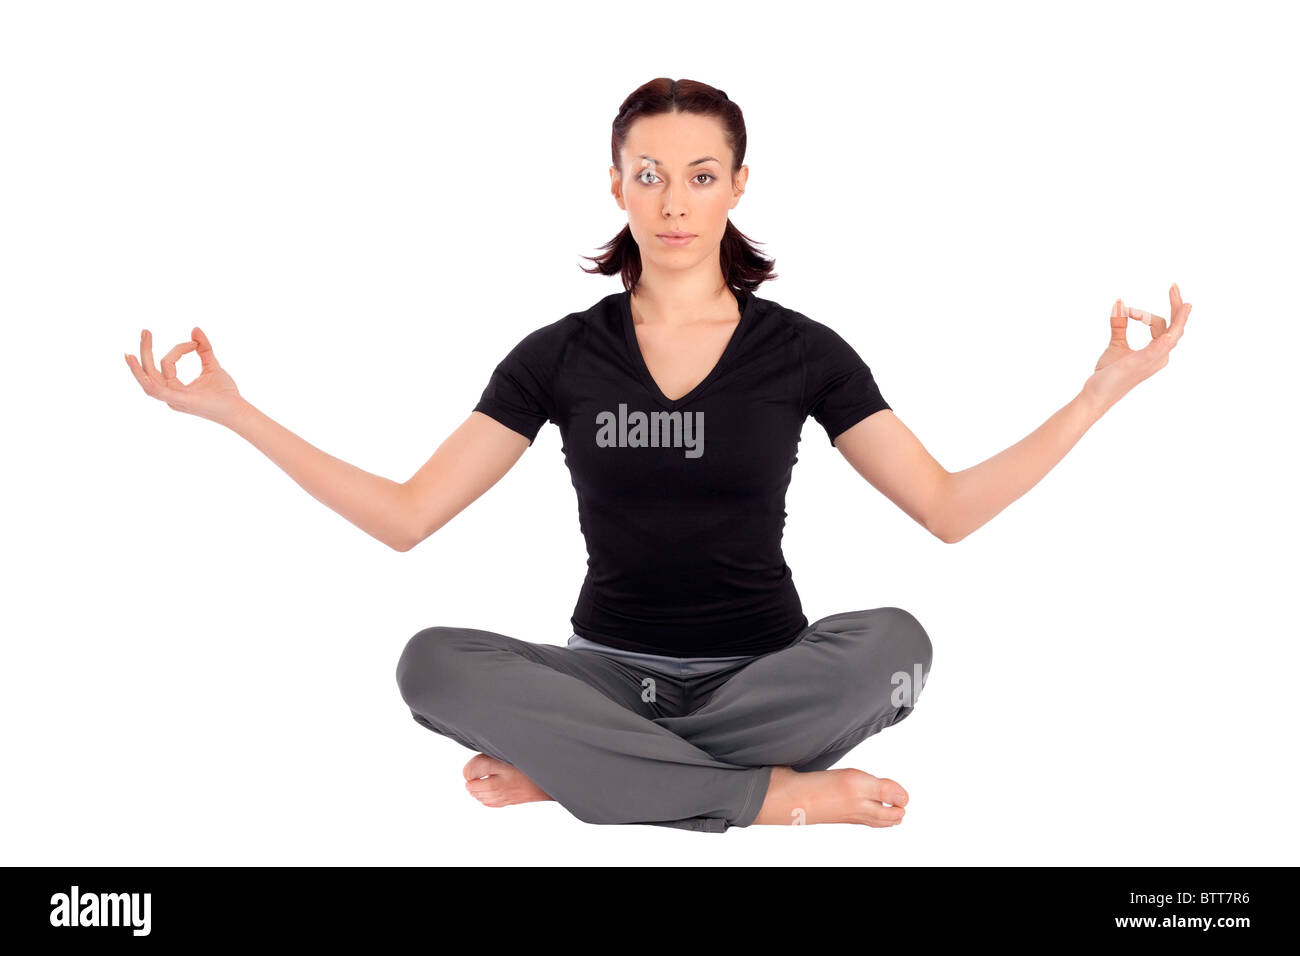 Young beautiful woman practicing breath control yoga asana, isolated on white background. Stock Photo